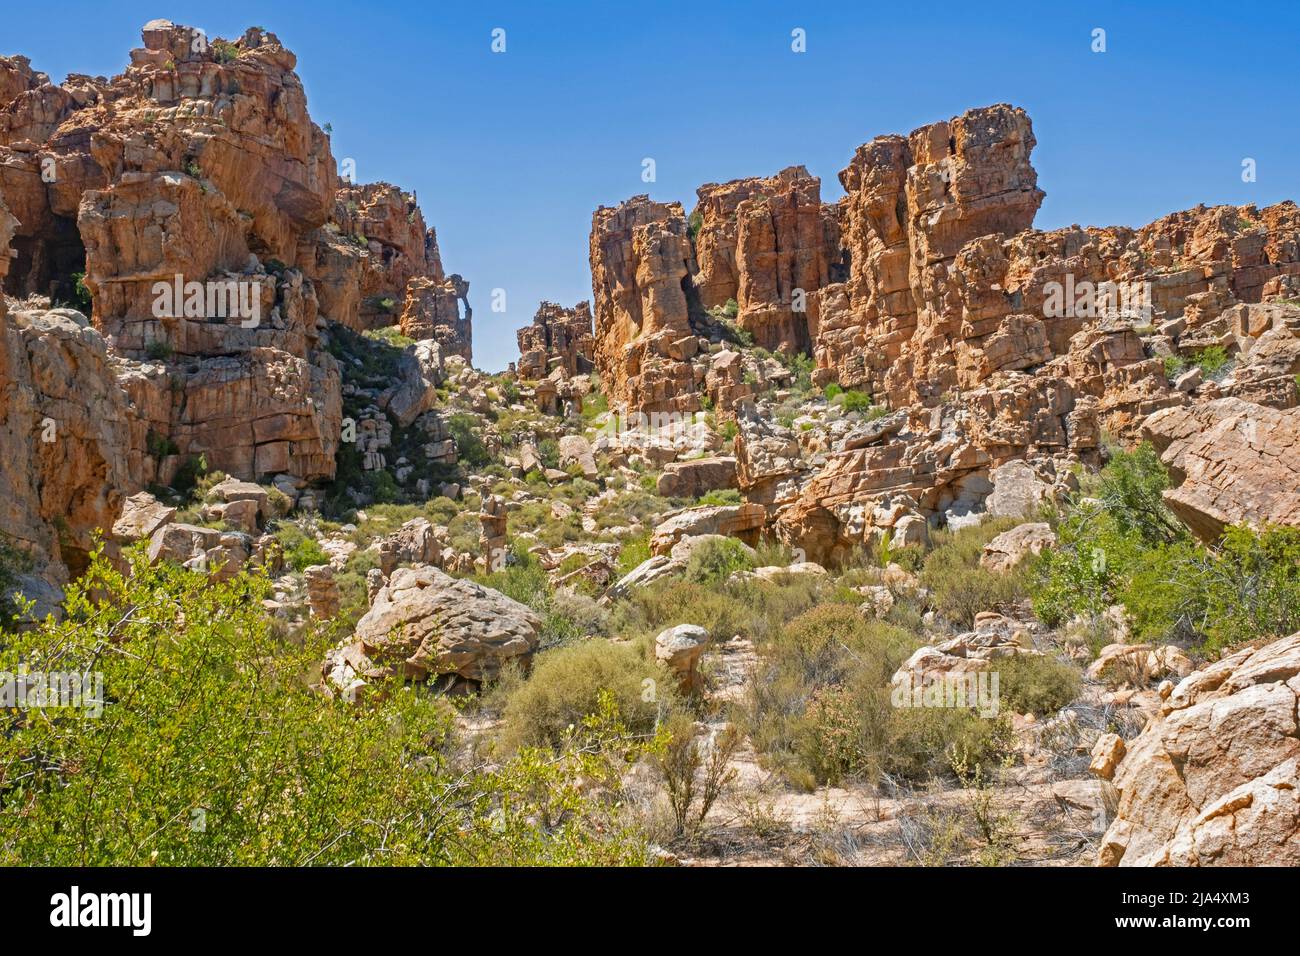 Sandstone rock formations at Truitjieskraal in the Matjiesrivier Nature Reserve, Cederberg Wilderness, Western Cape, South Africa Stock Photo